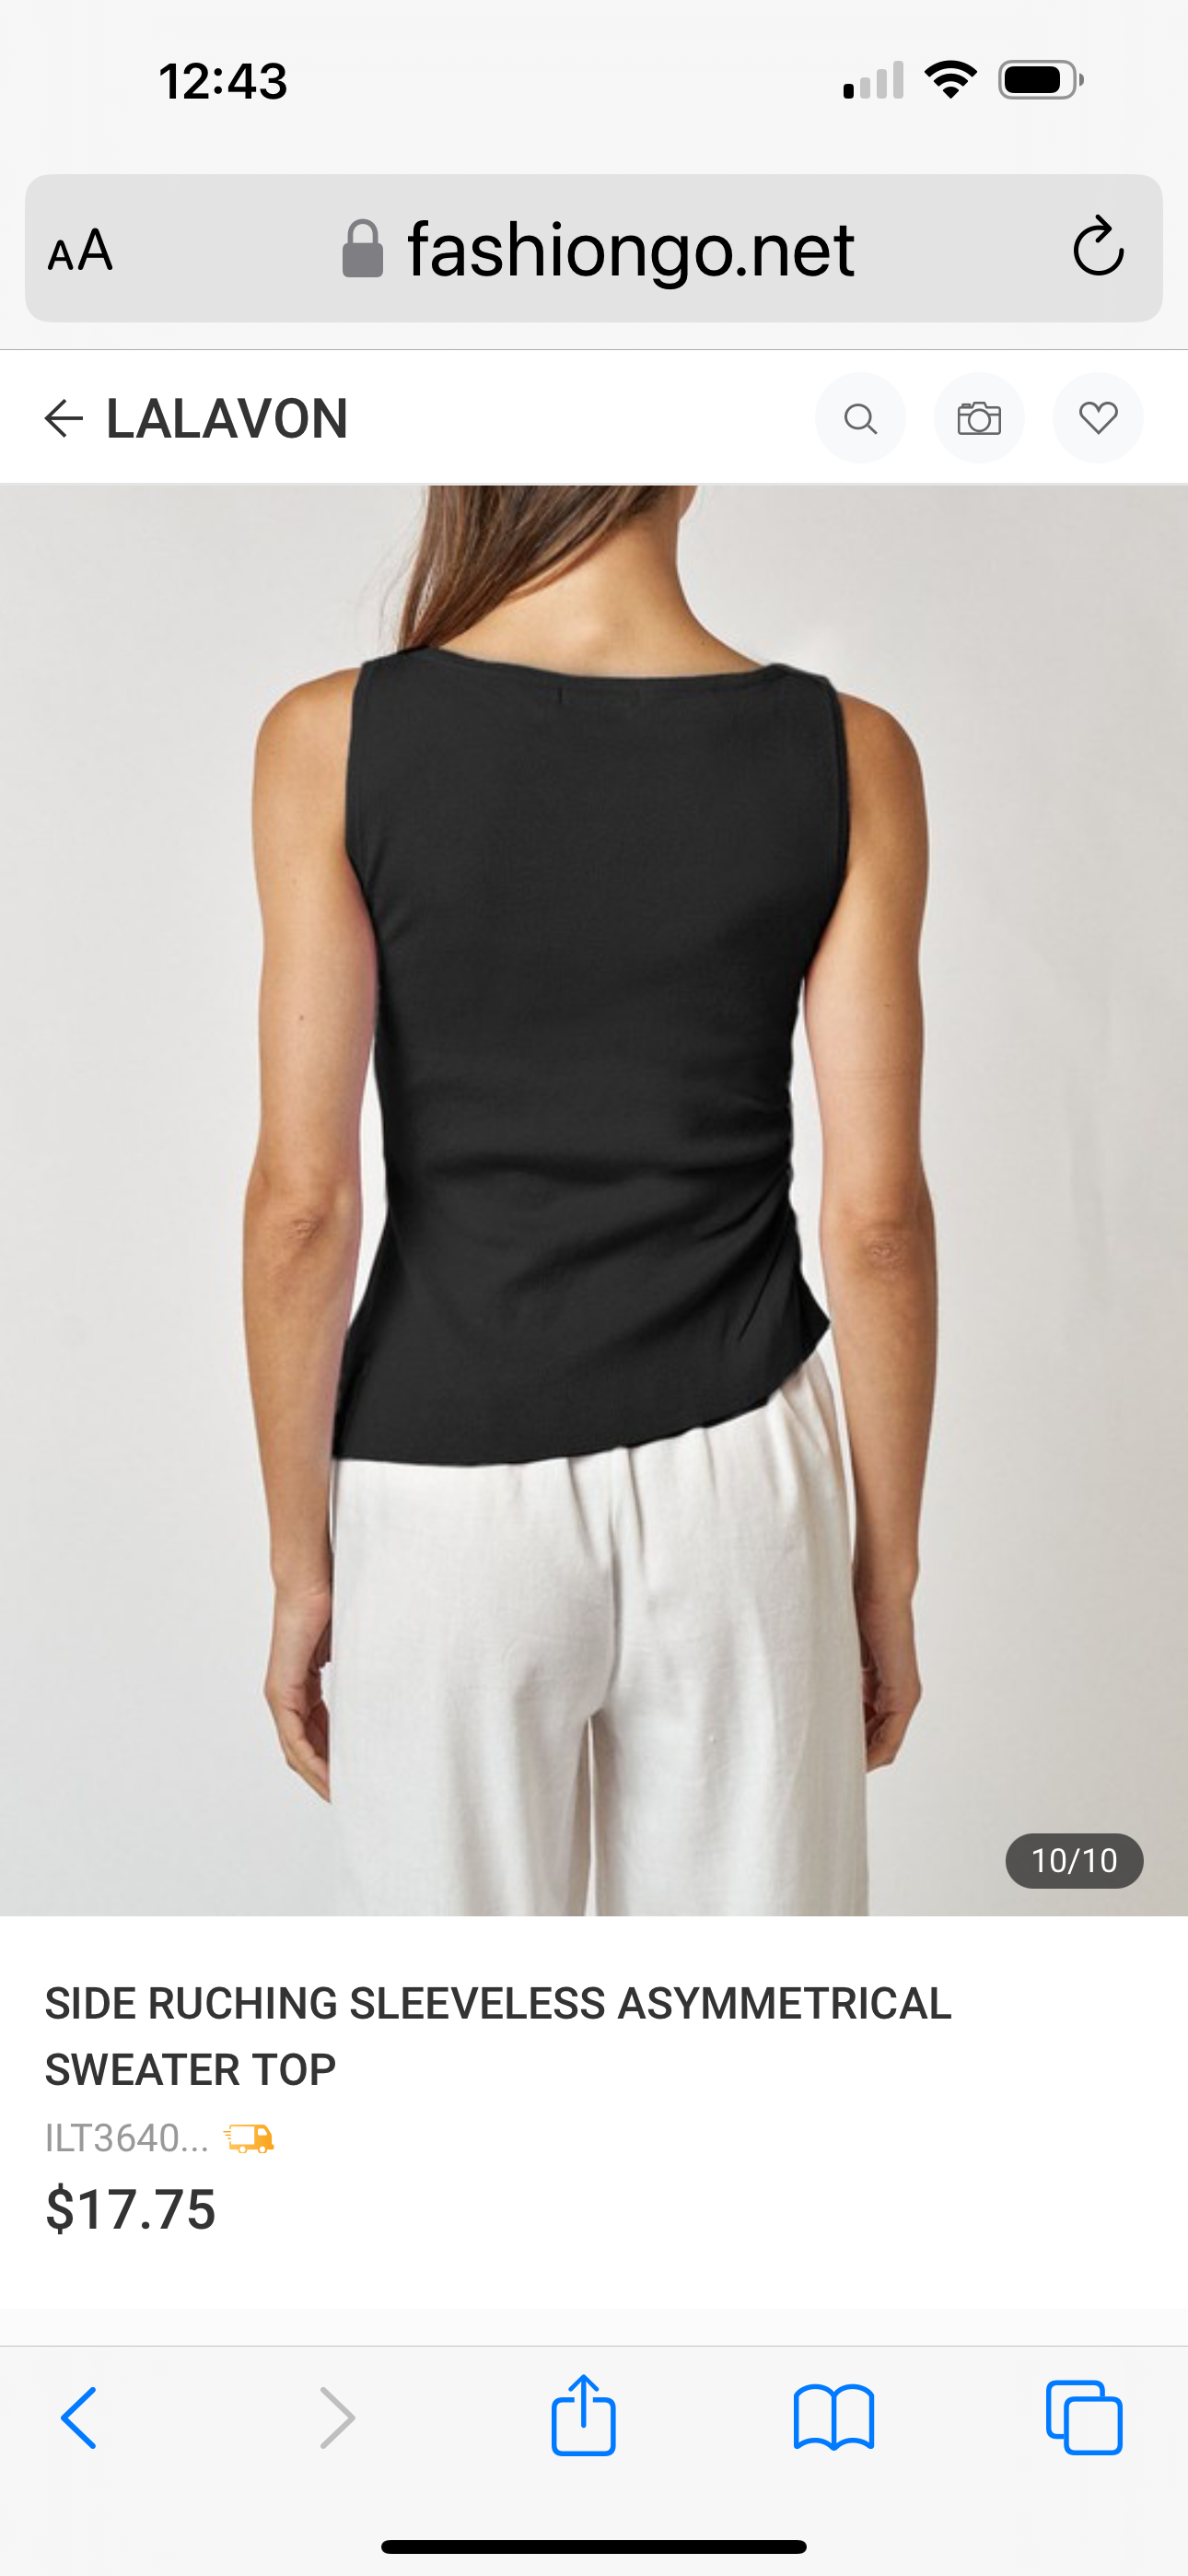 SIDE RUCHING SLEEVELESS ASYMMETRICAL
SWEATER TOP - multiple colors